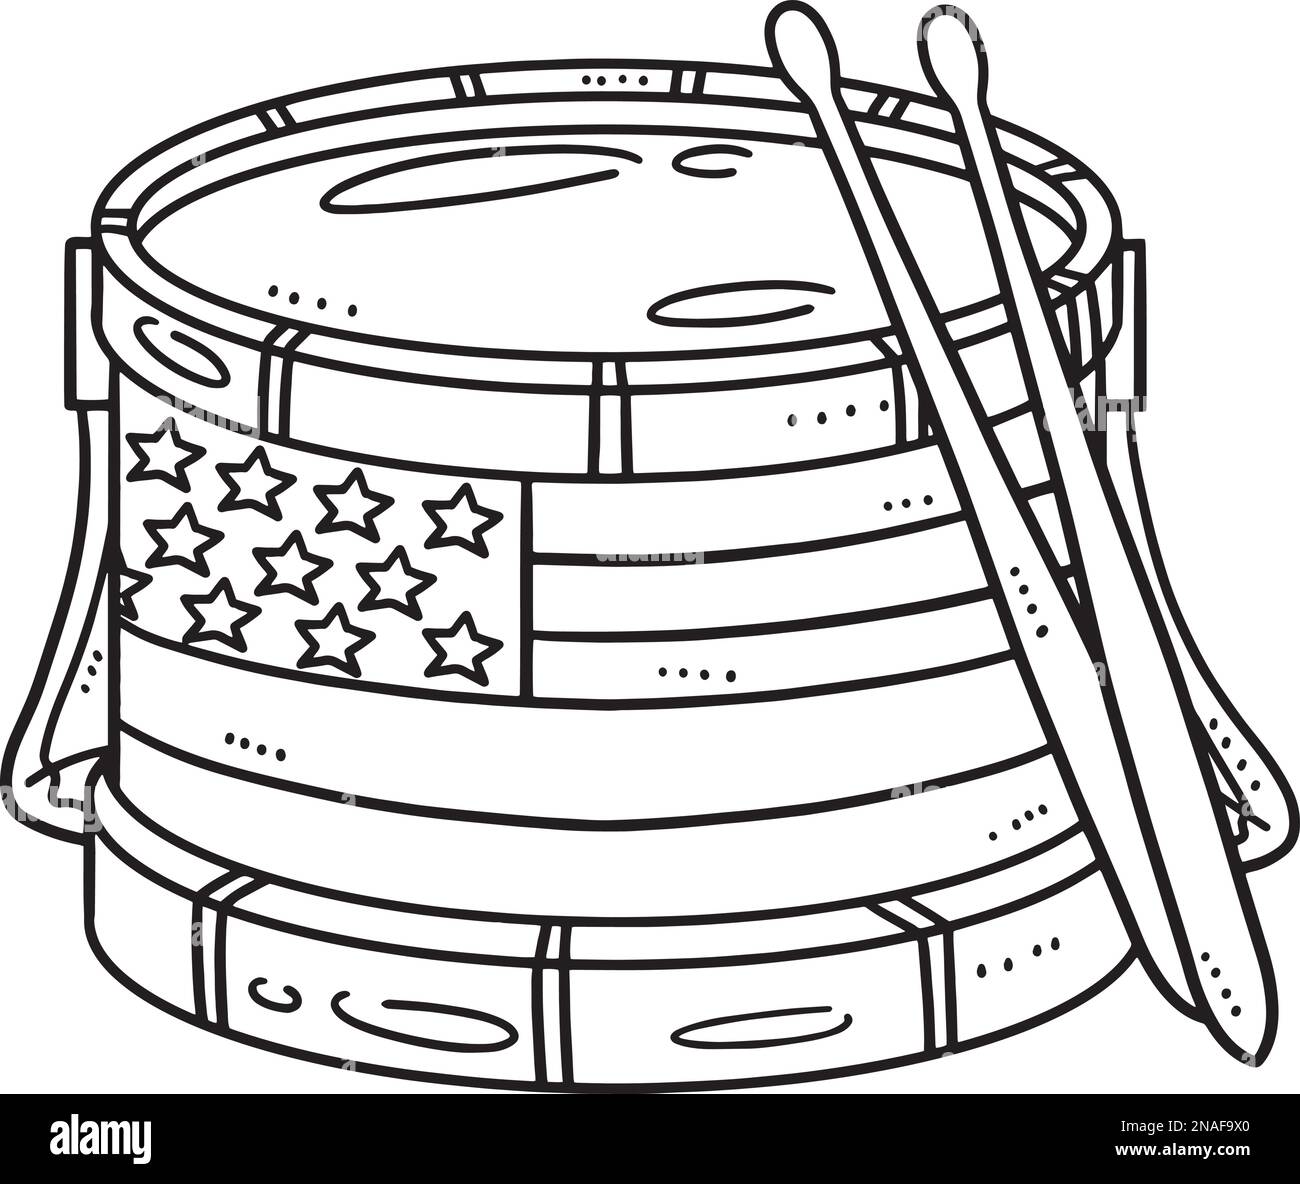 Marching Drum Isolated Coloring Page for Kids Stock Vector